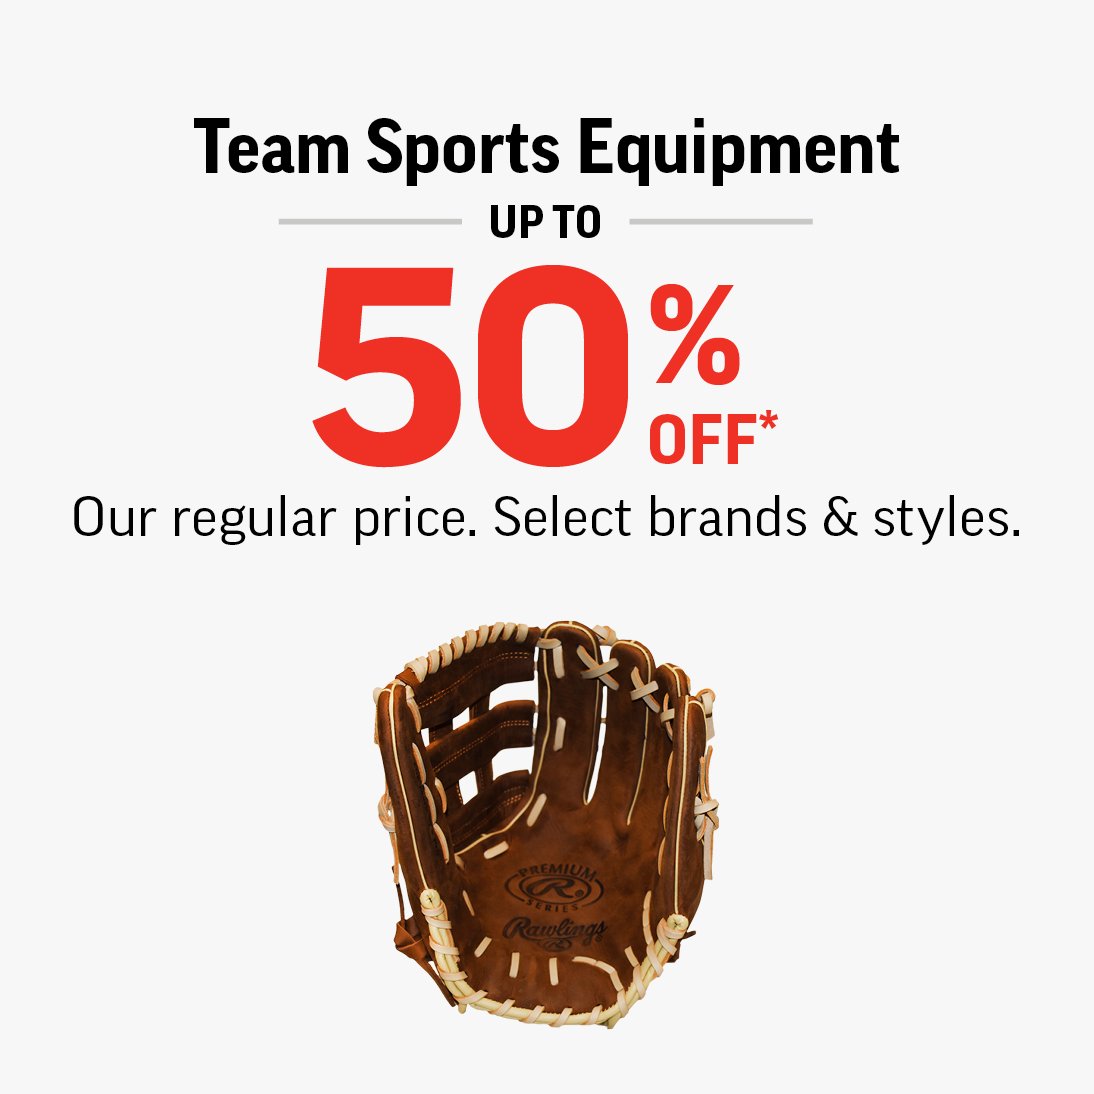 TEAM SPORTS EQUIPMENT UP TO 50%